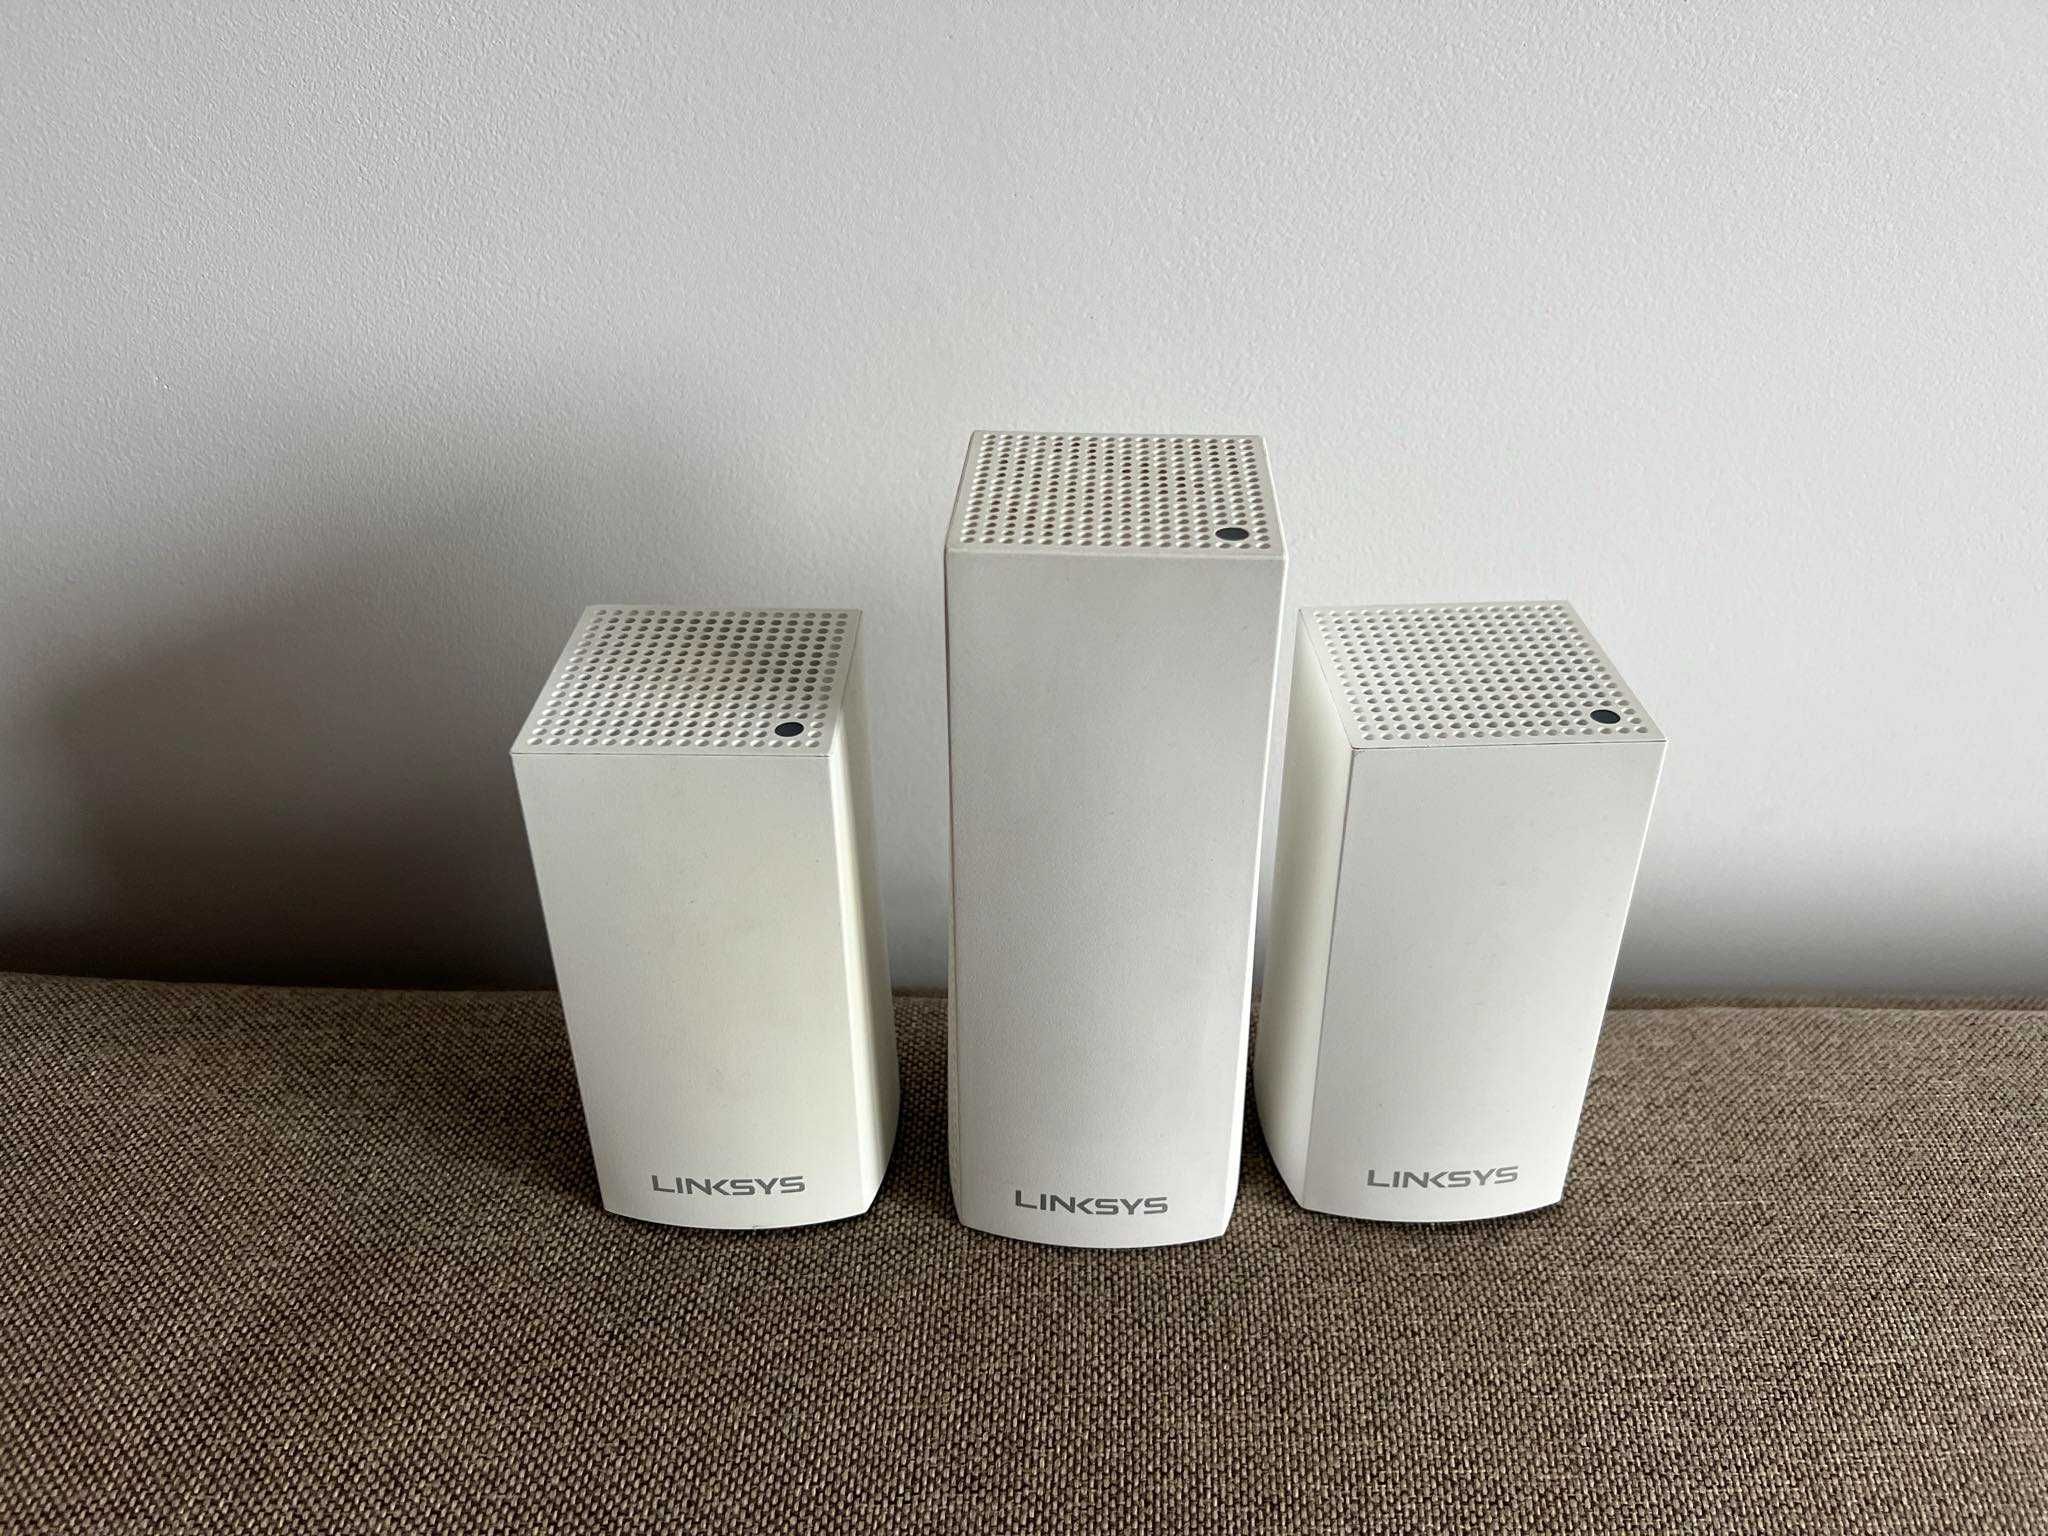 Router Extender Mesh Linksys Velop 3 bucati extindere acoperire wifi